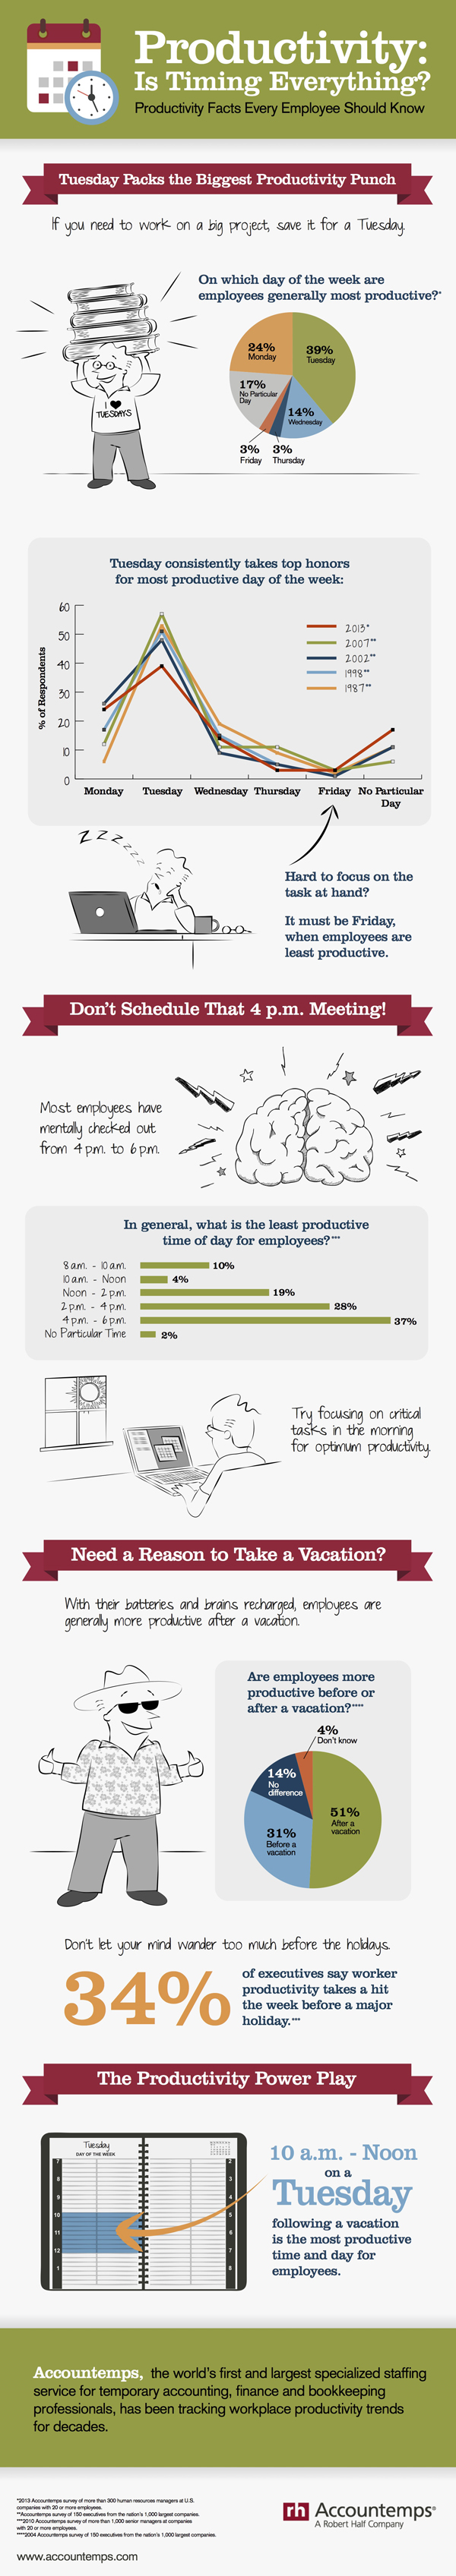 15 Tips for Boosting Your Productivity